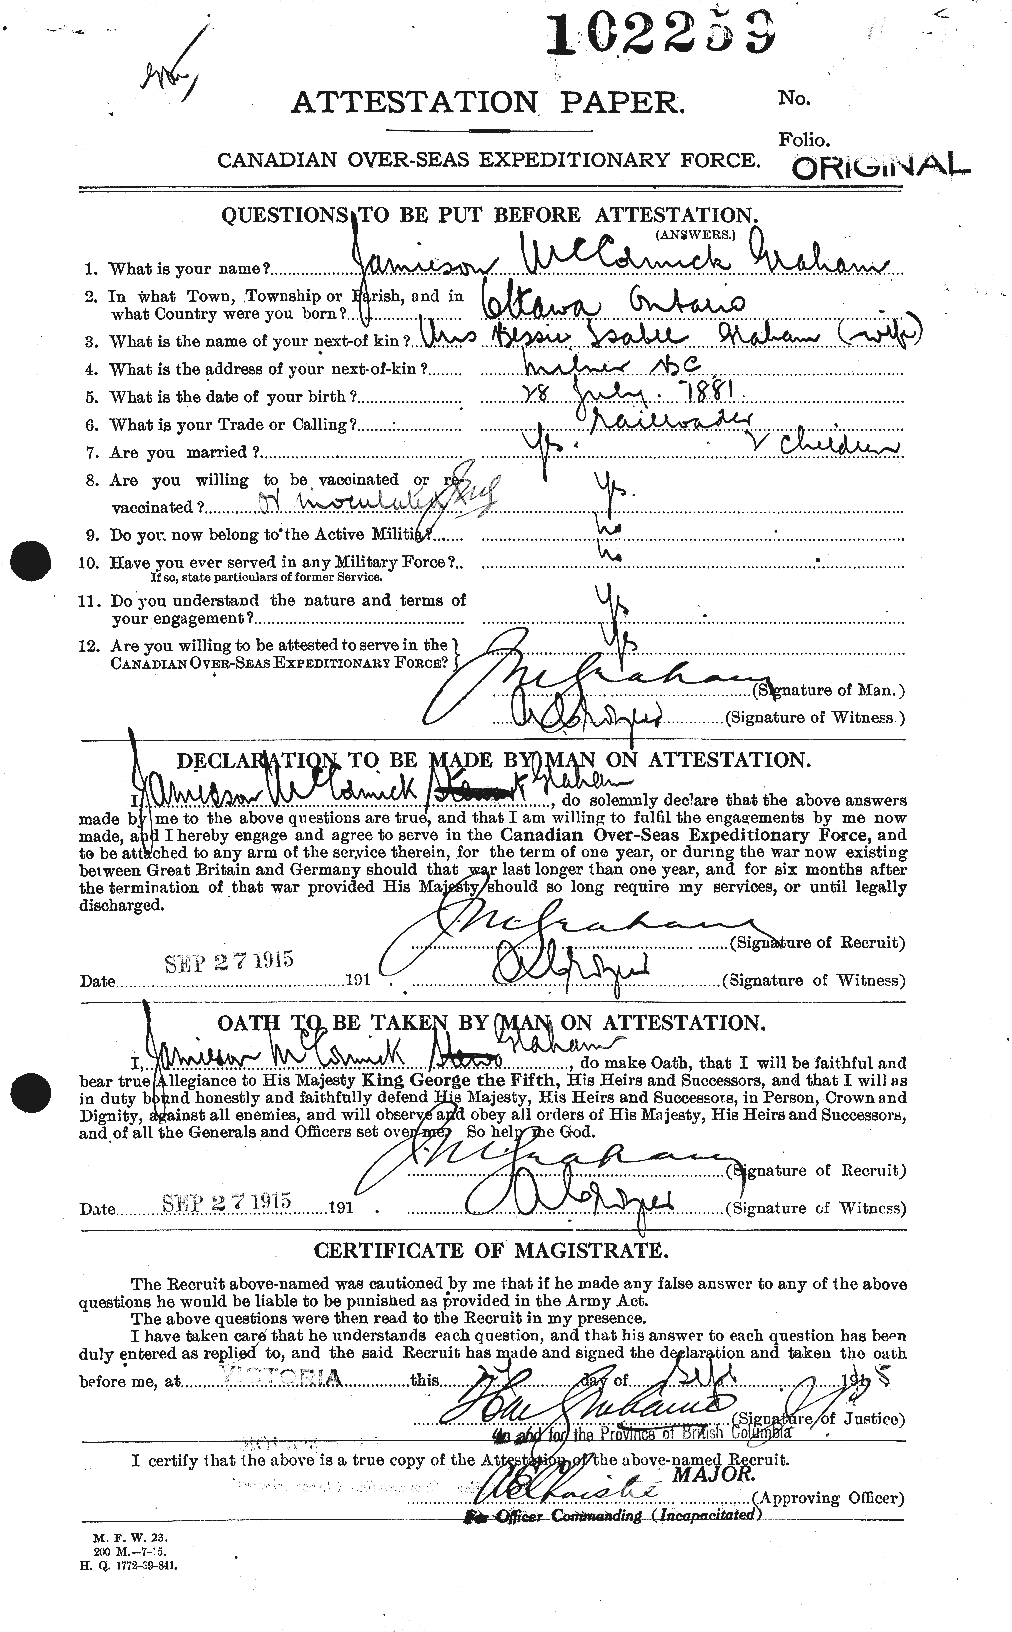 Personnel Records of the First World War - CEF 359102a